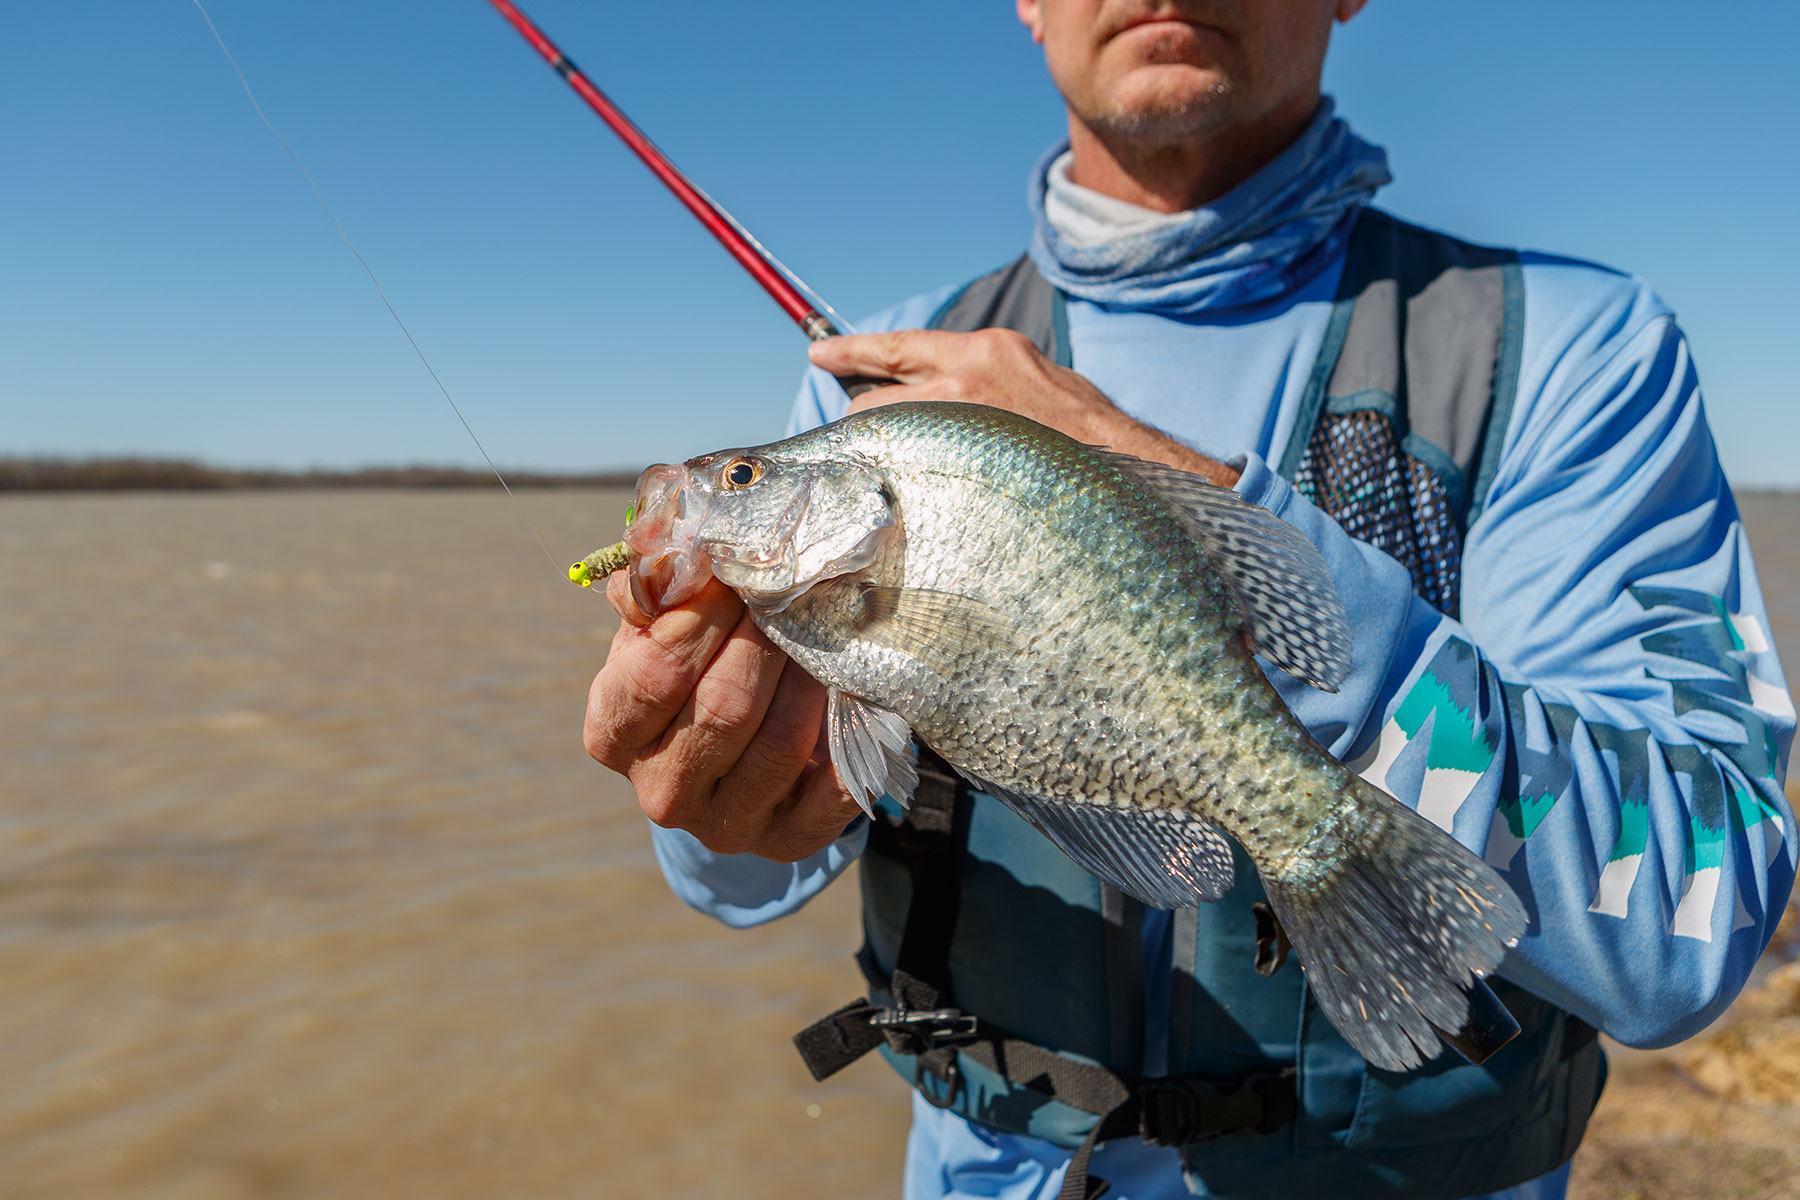 Pronounce this popular anglers’ quarry incorrectly (it’s KROP-ee) and you may get the wrong idea about crappie. Tasty and tenacious, this panfish is plentiful around the state.